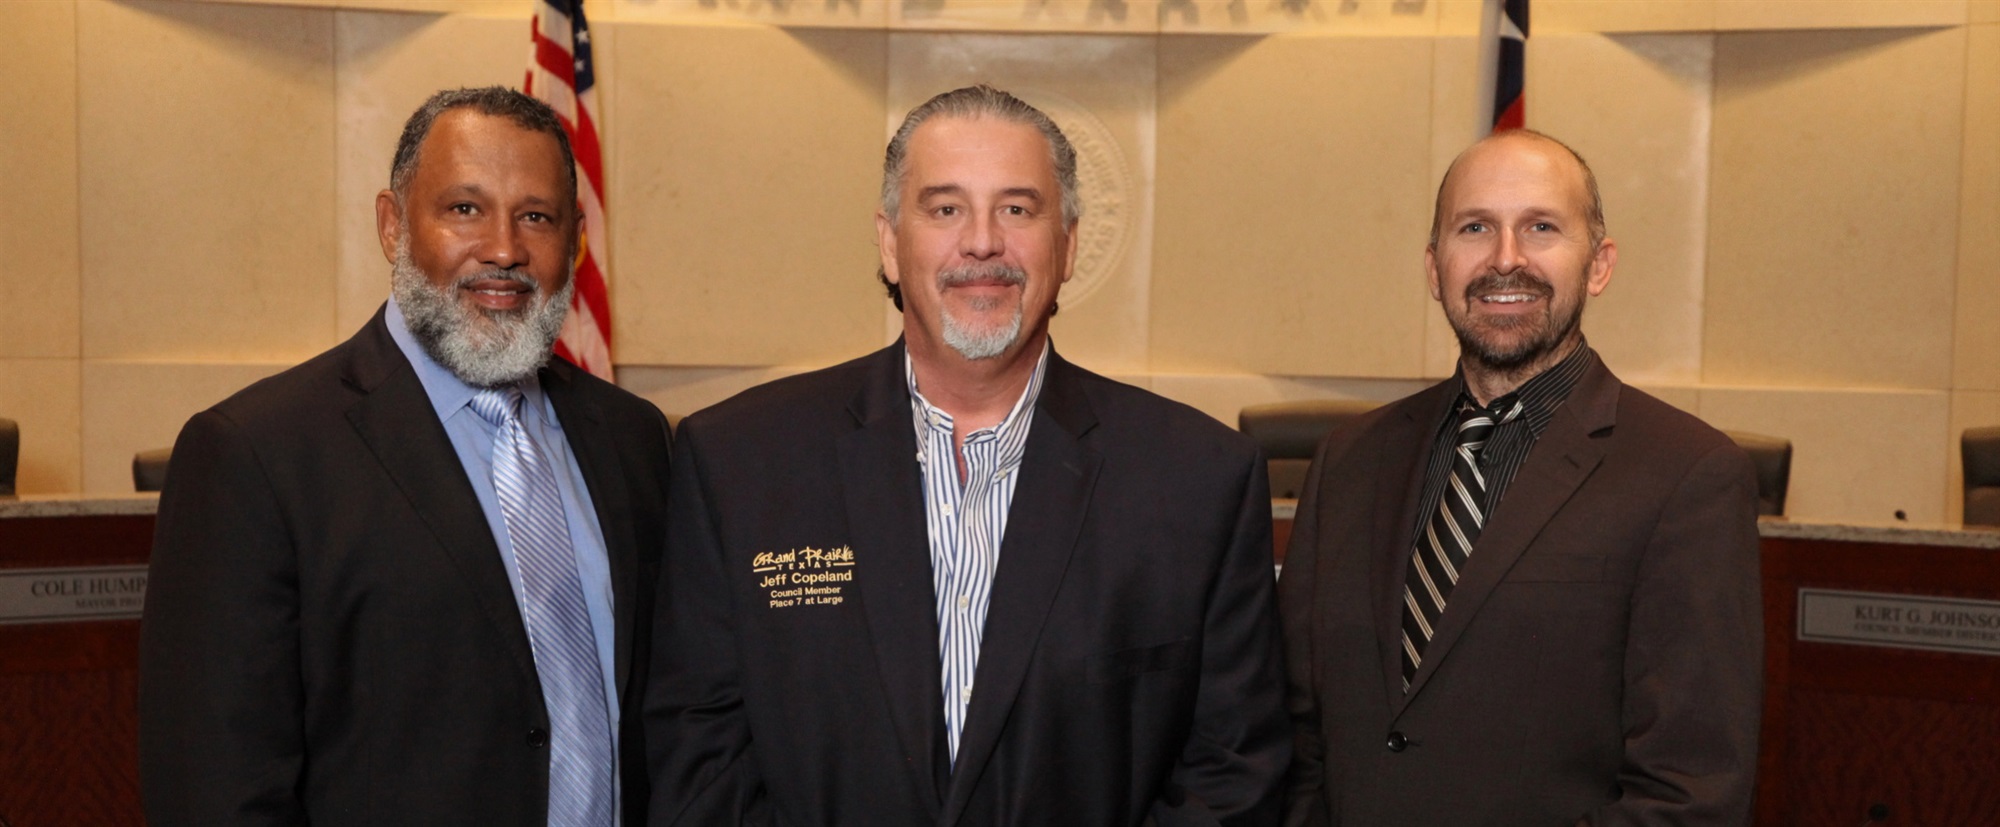 Council members Kurt Johnson, Jeff Copeland and Cole Humphreys posing for a picture